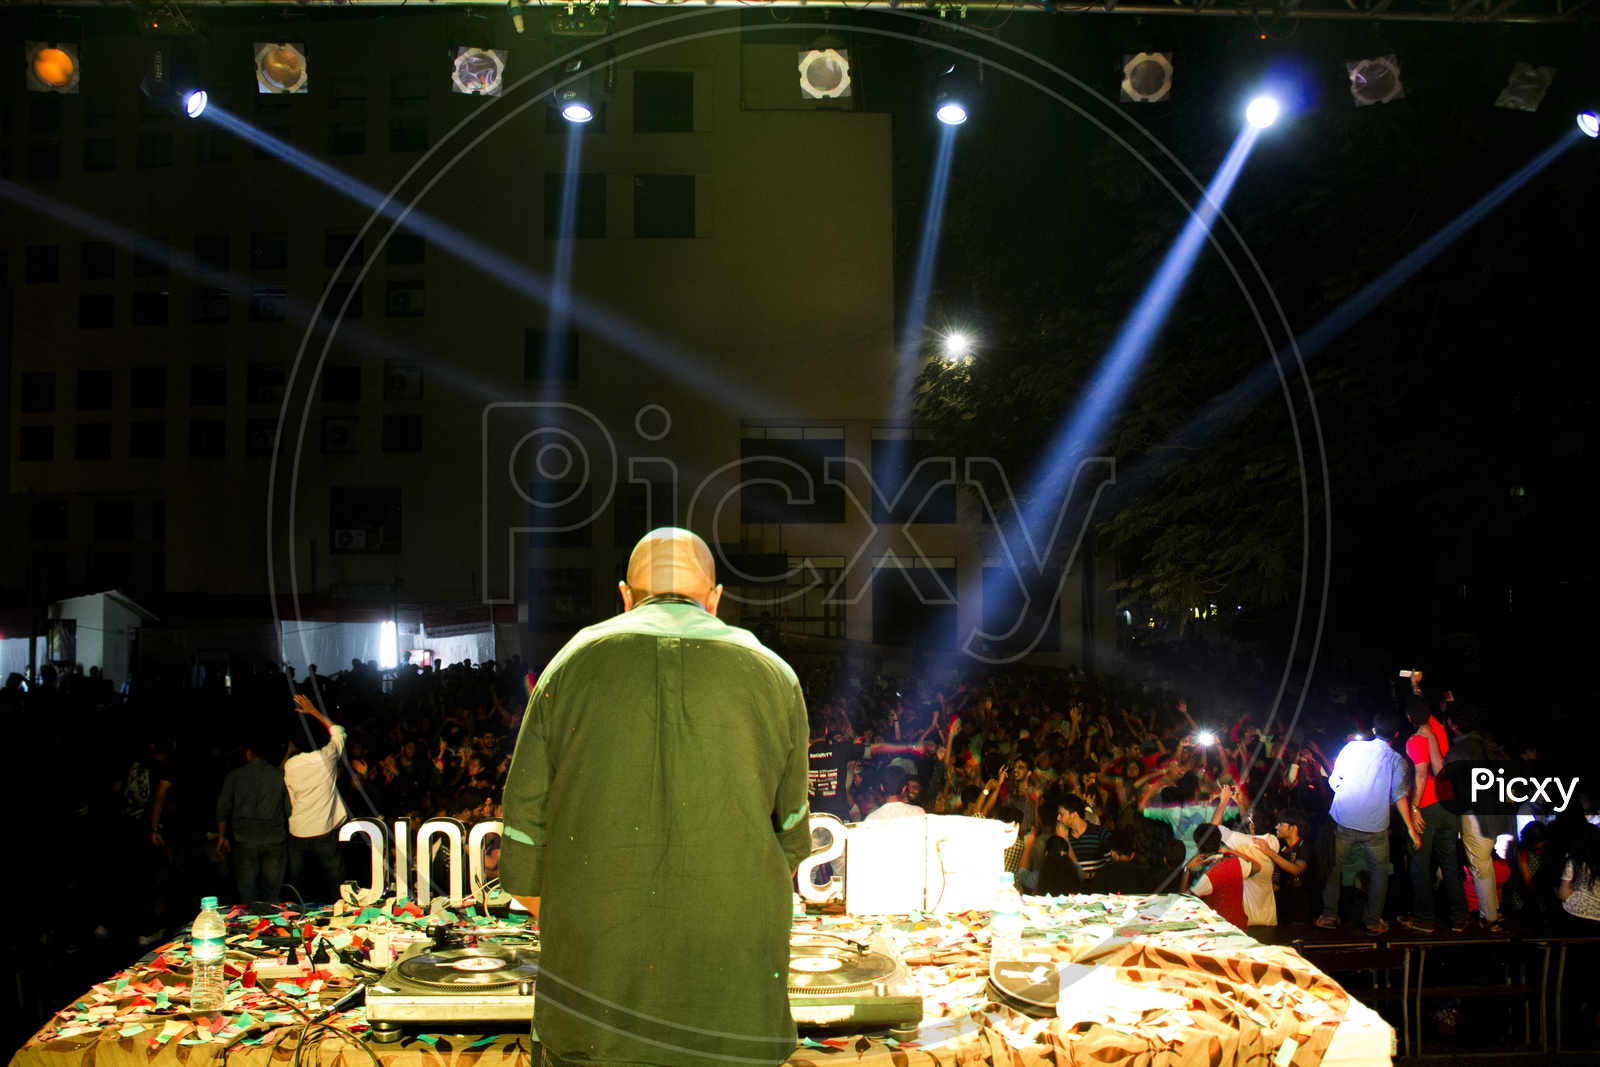 DJ at the Event of VH1 Supersonic